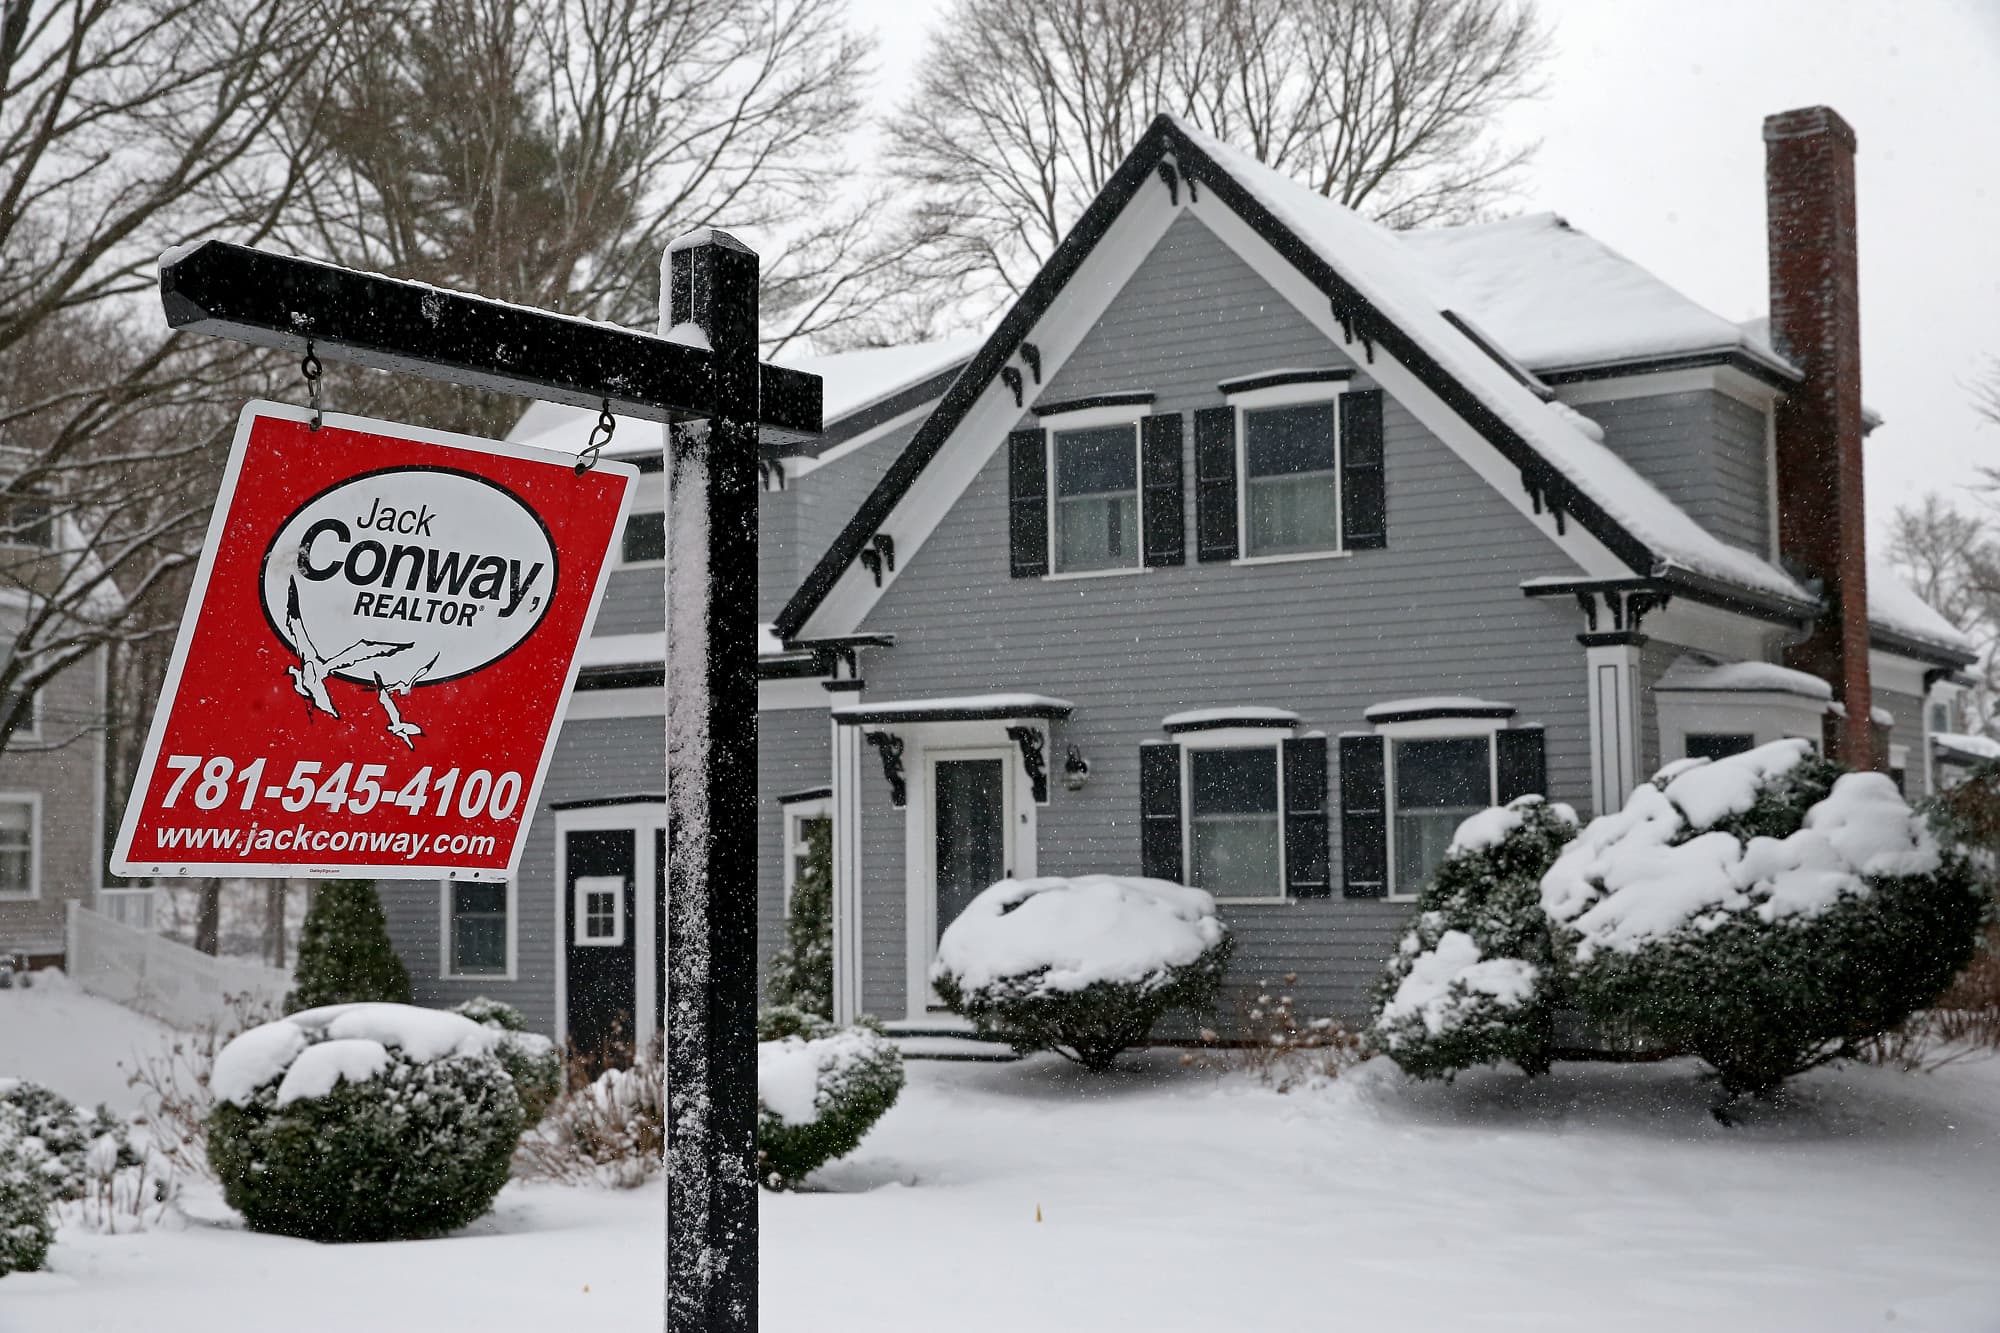 Existing home sales decline for the first time in 5 months as prices rise and supply falls